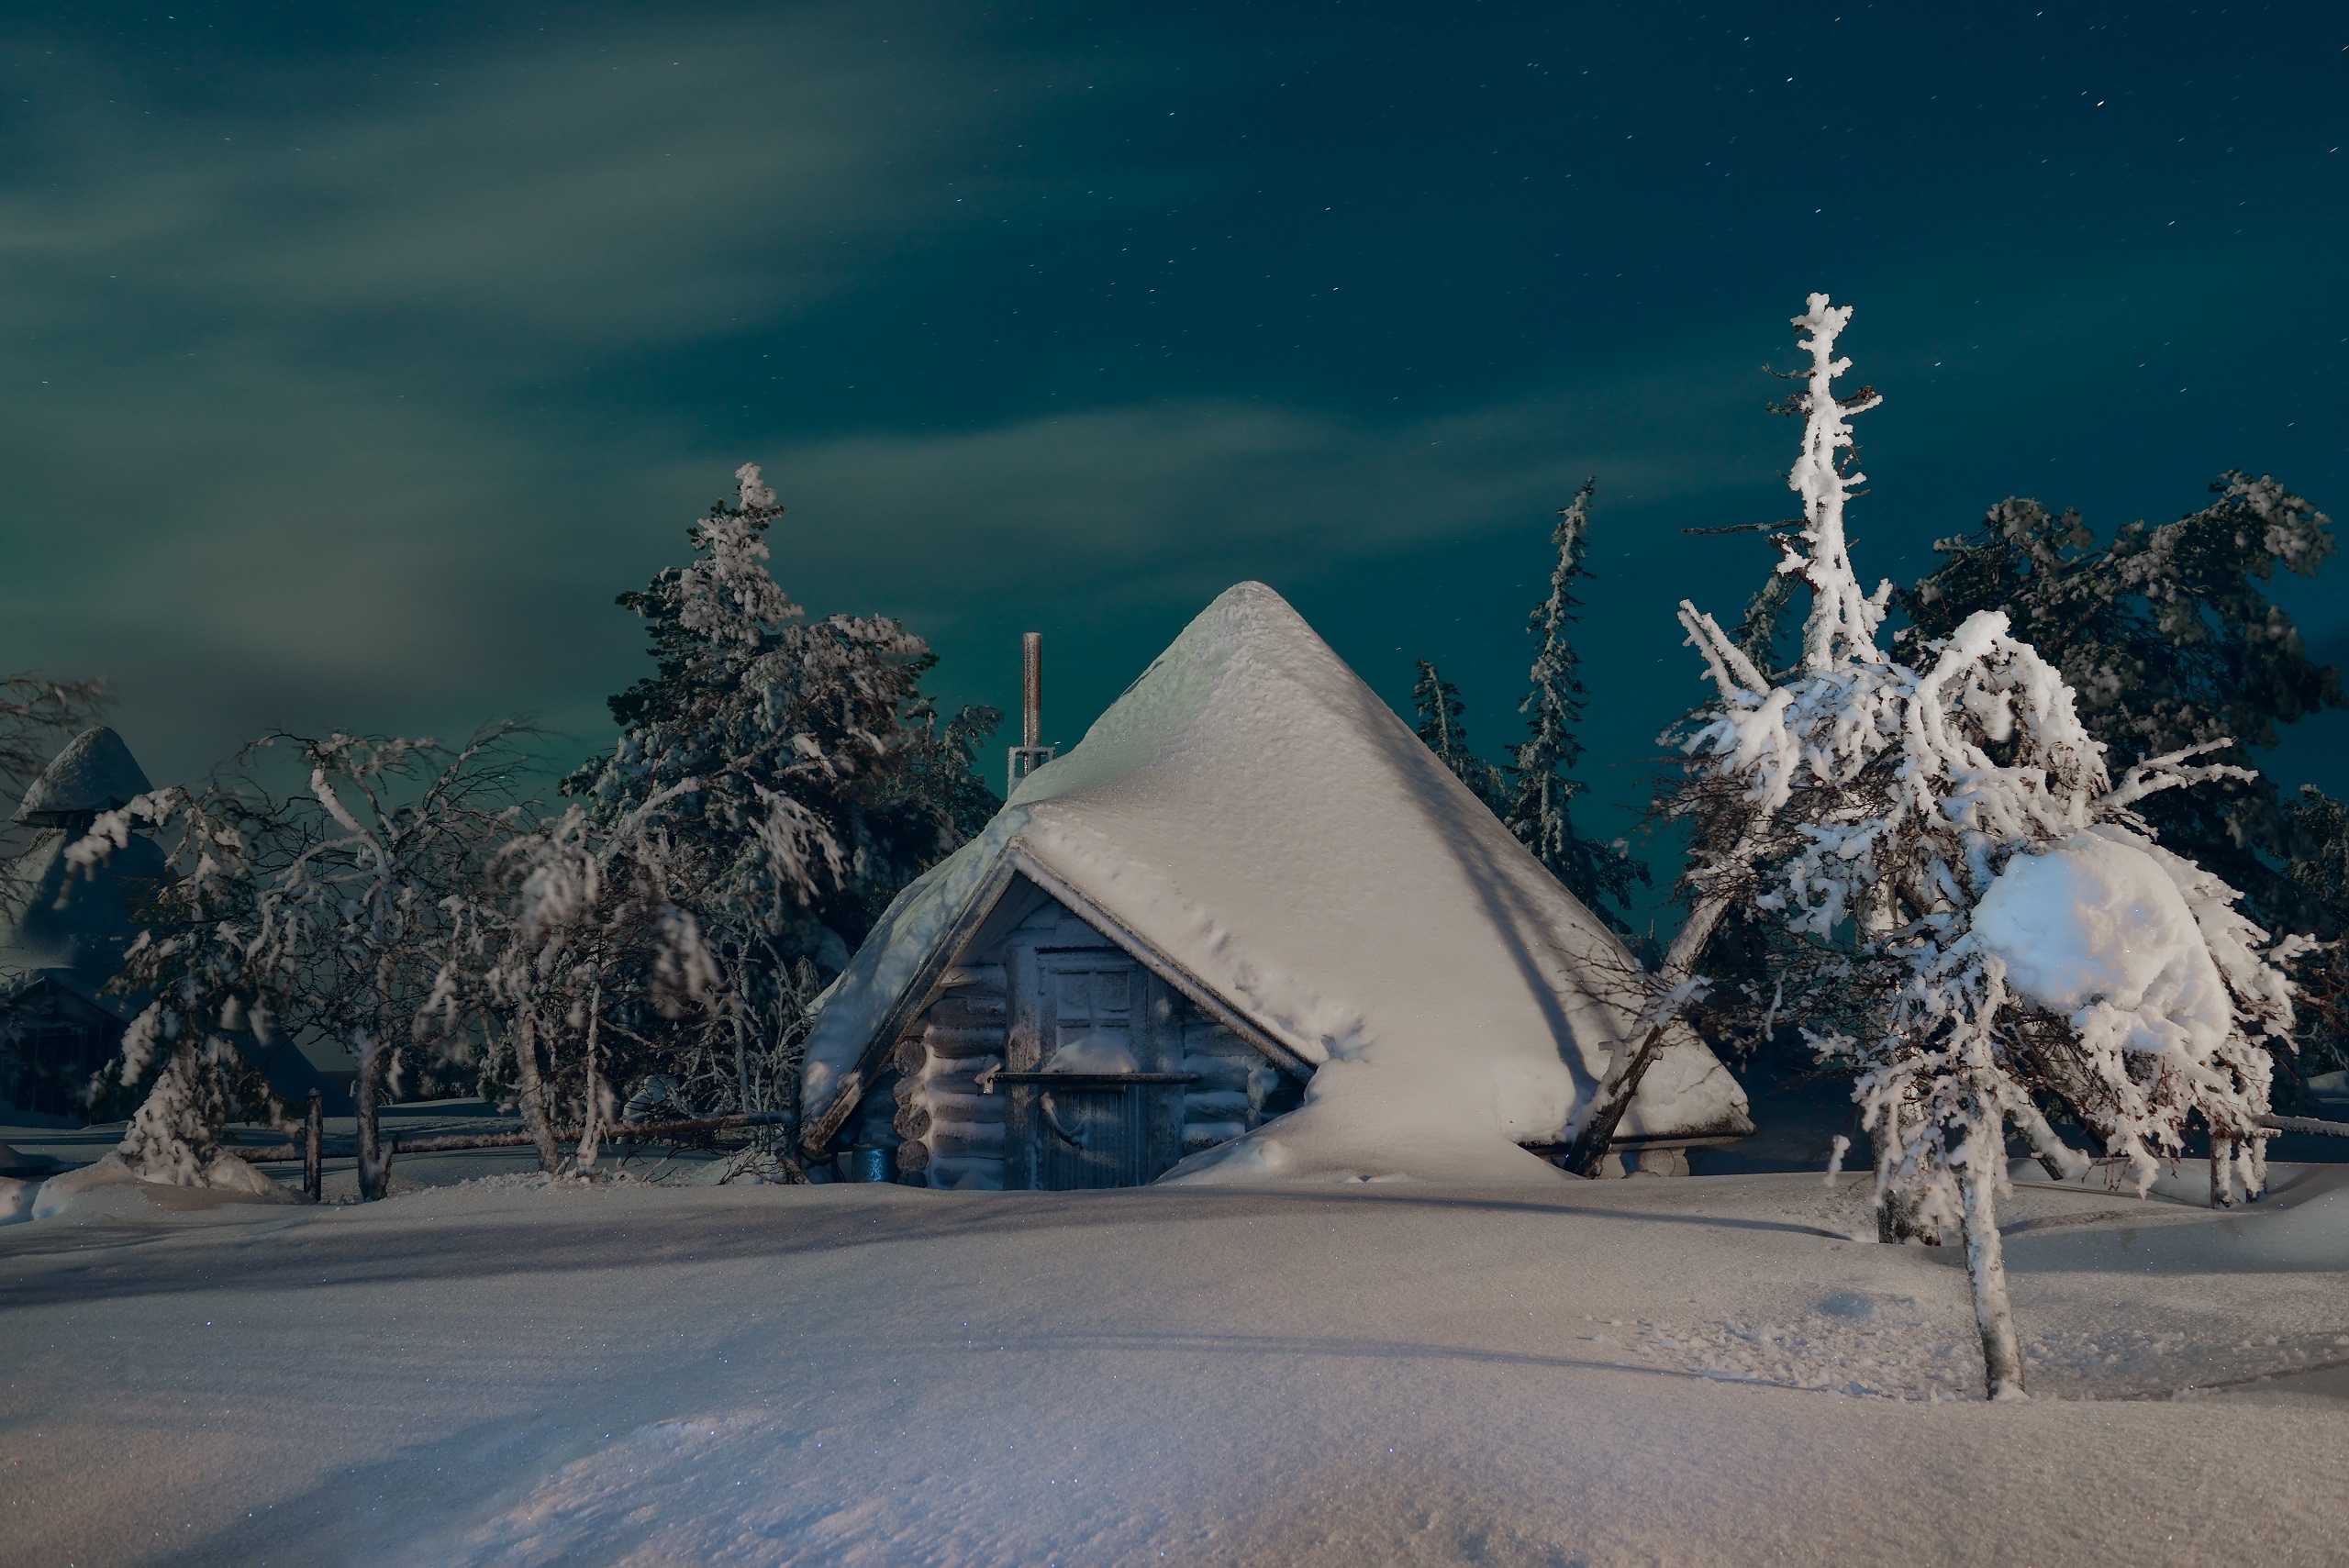 Windows Backgrounds man made, cabin, finland, nature, night, snow, winter